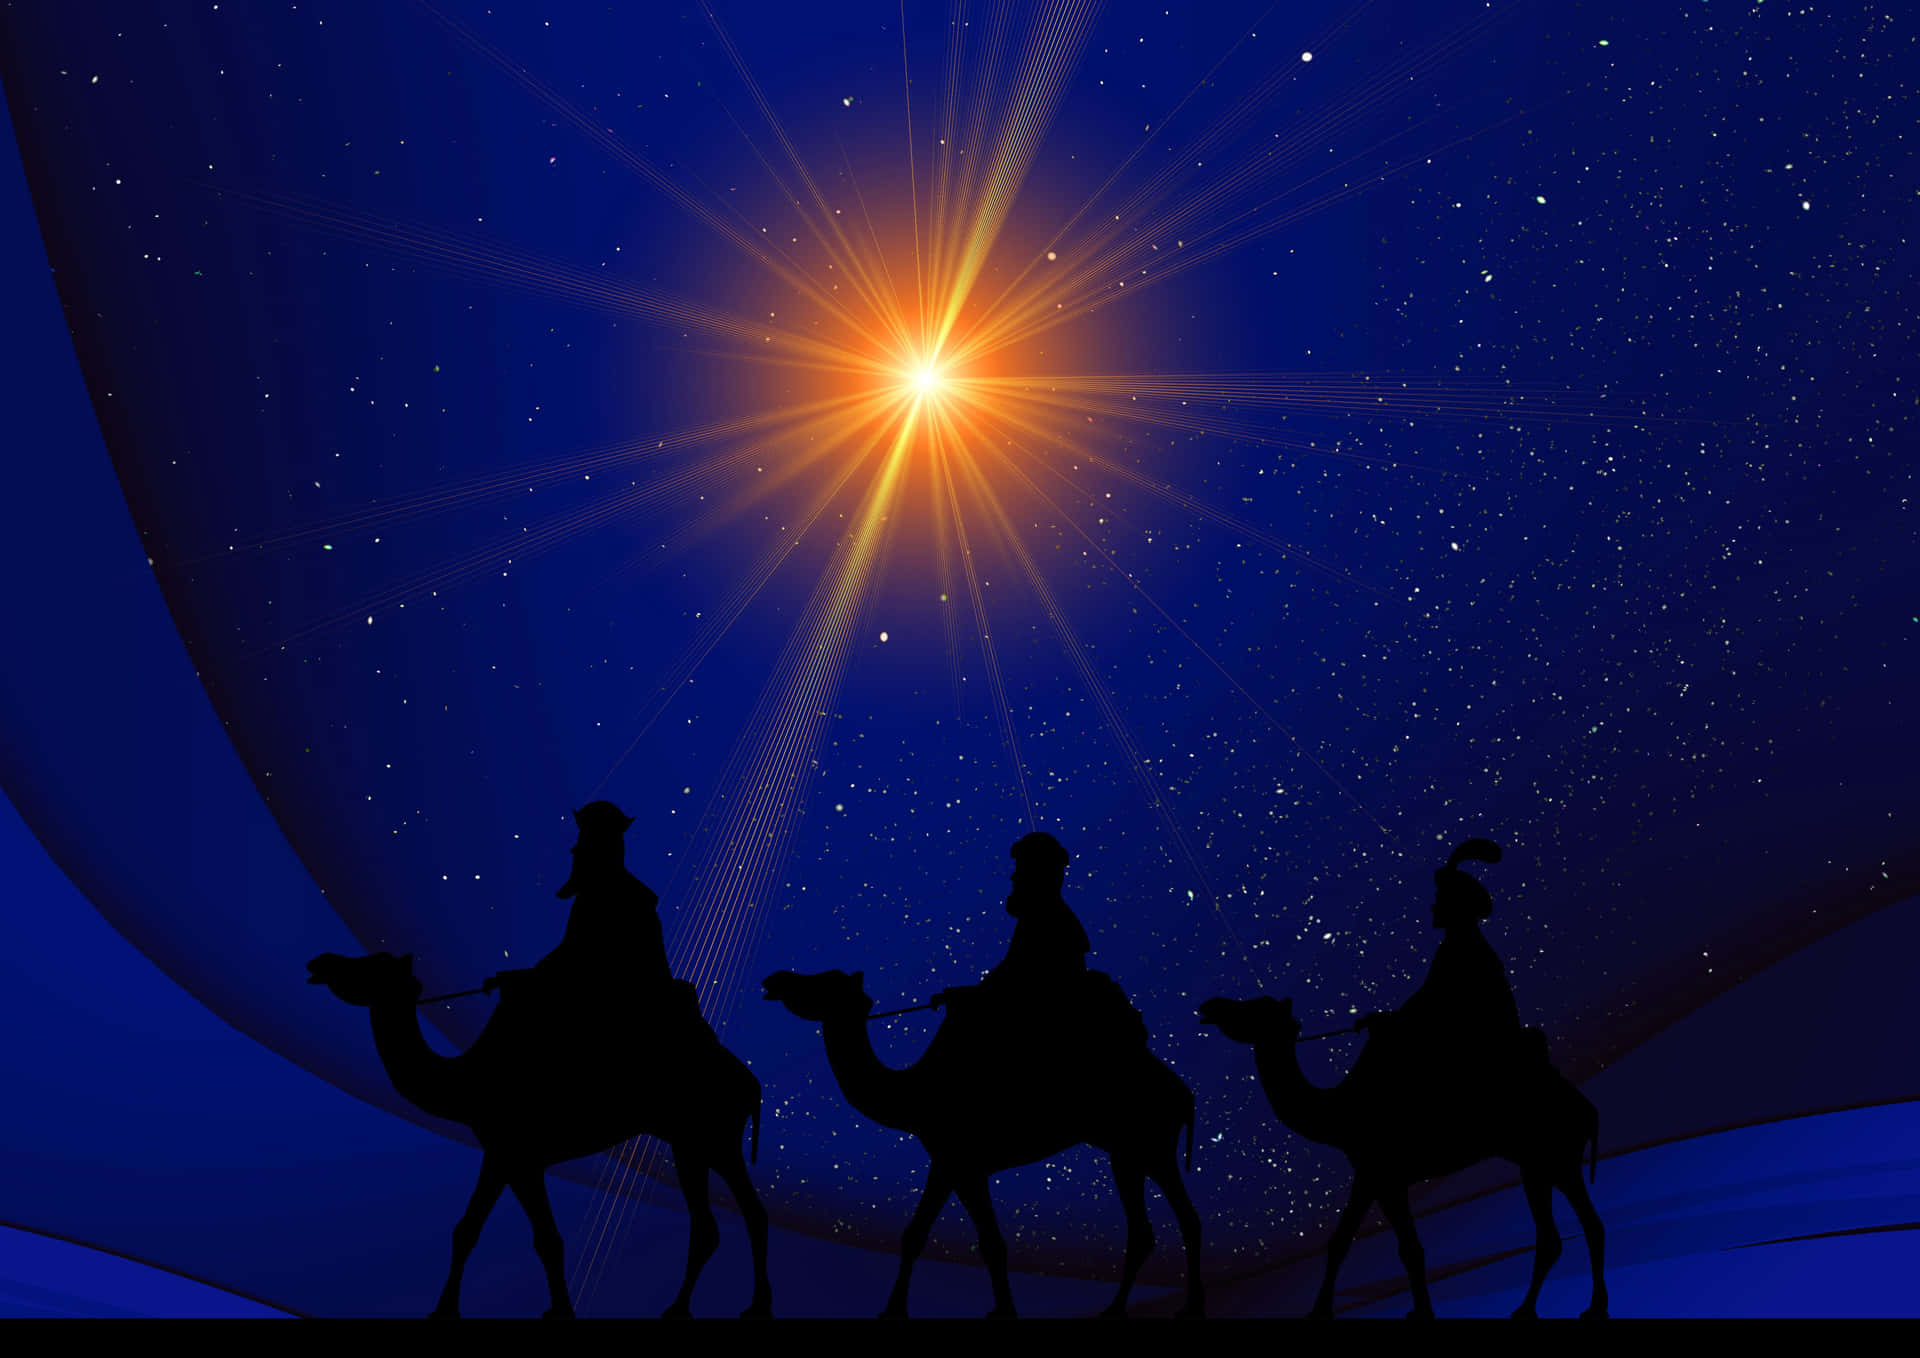 Three Wise Men Riding Camels In The Night Sky